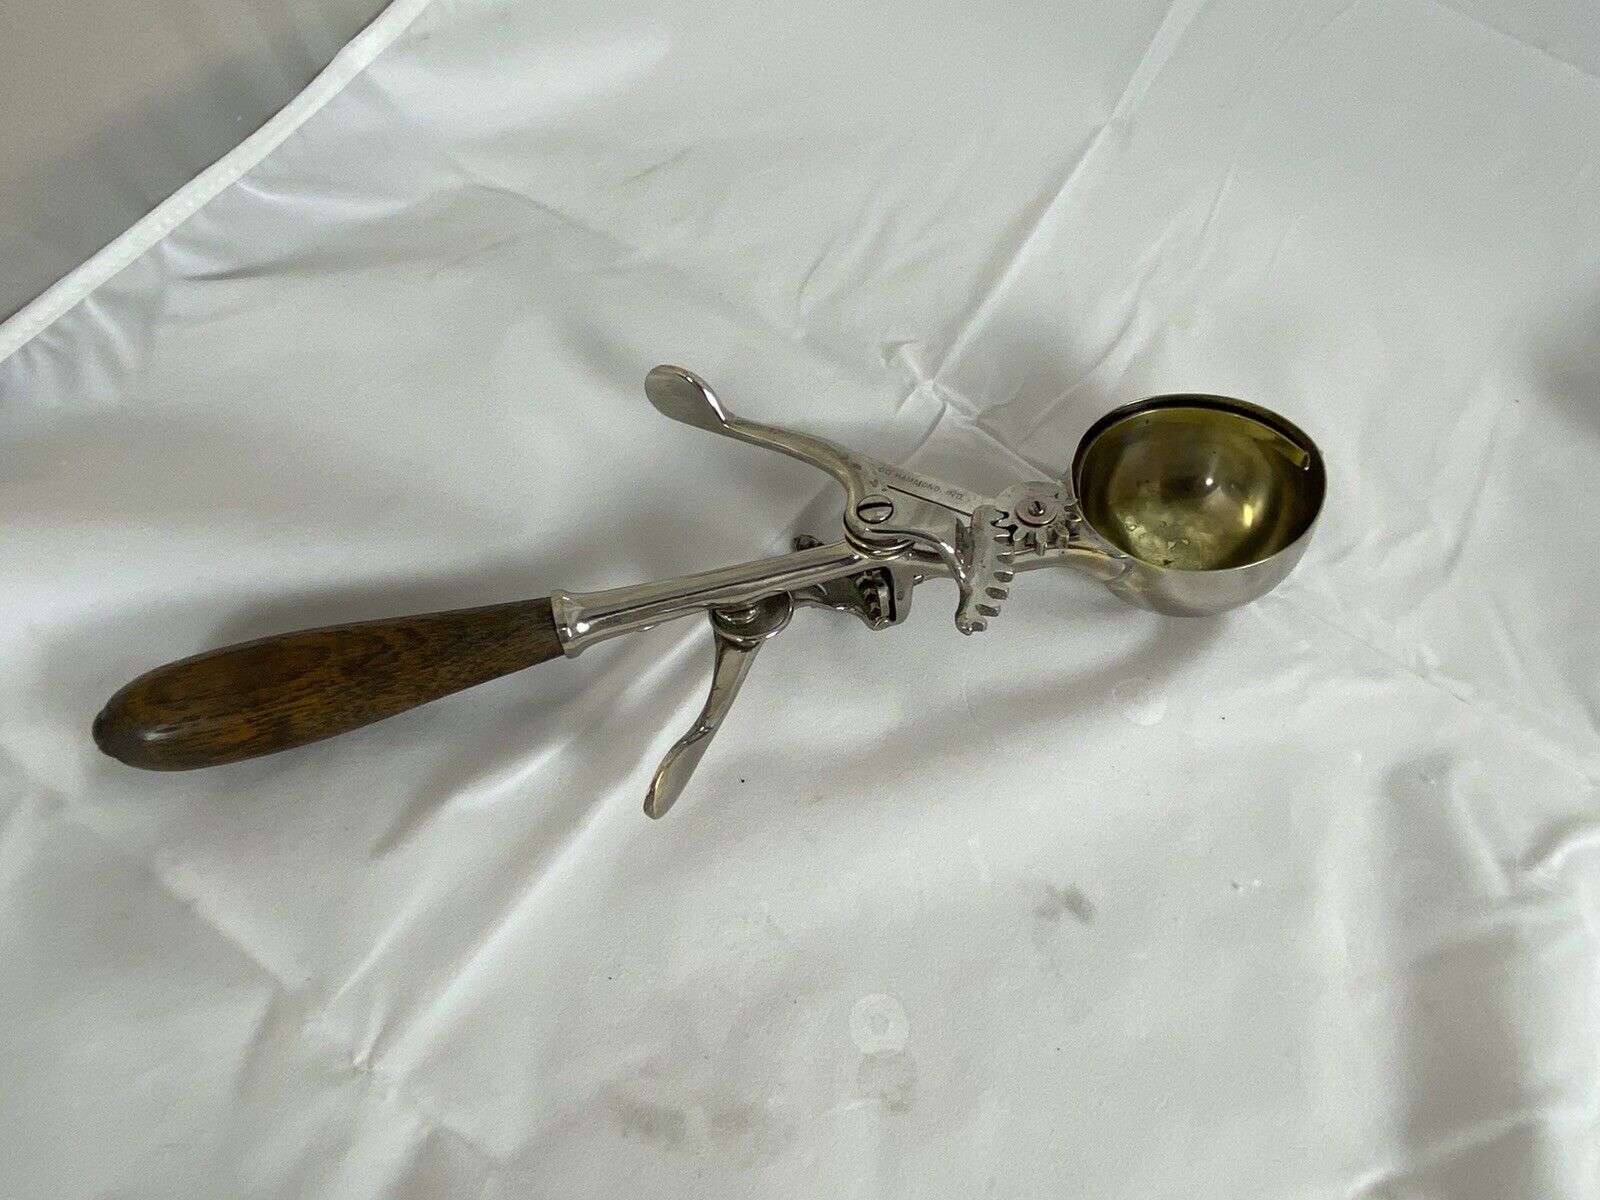 Square Deal Mfg Co Hammond Ind Slicer Ice Cream Scoop. Extremely Rare